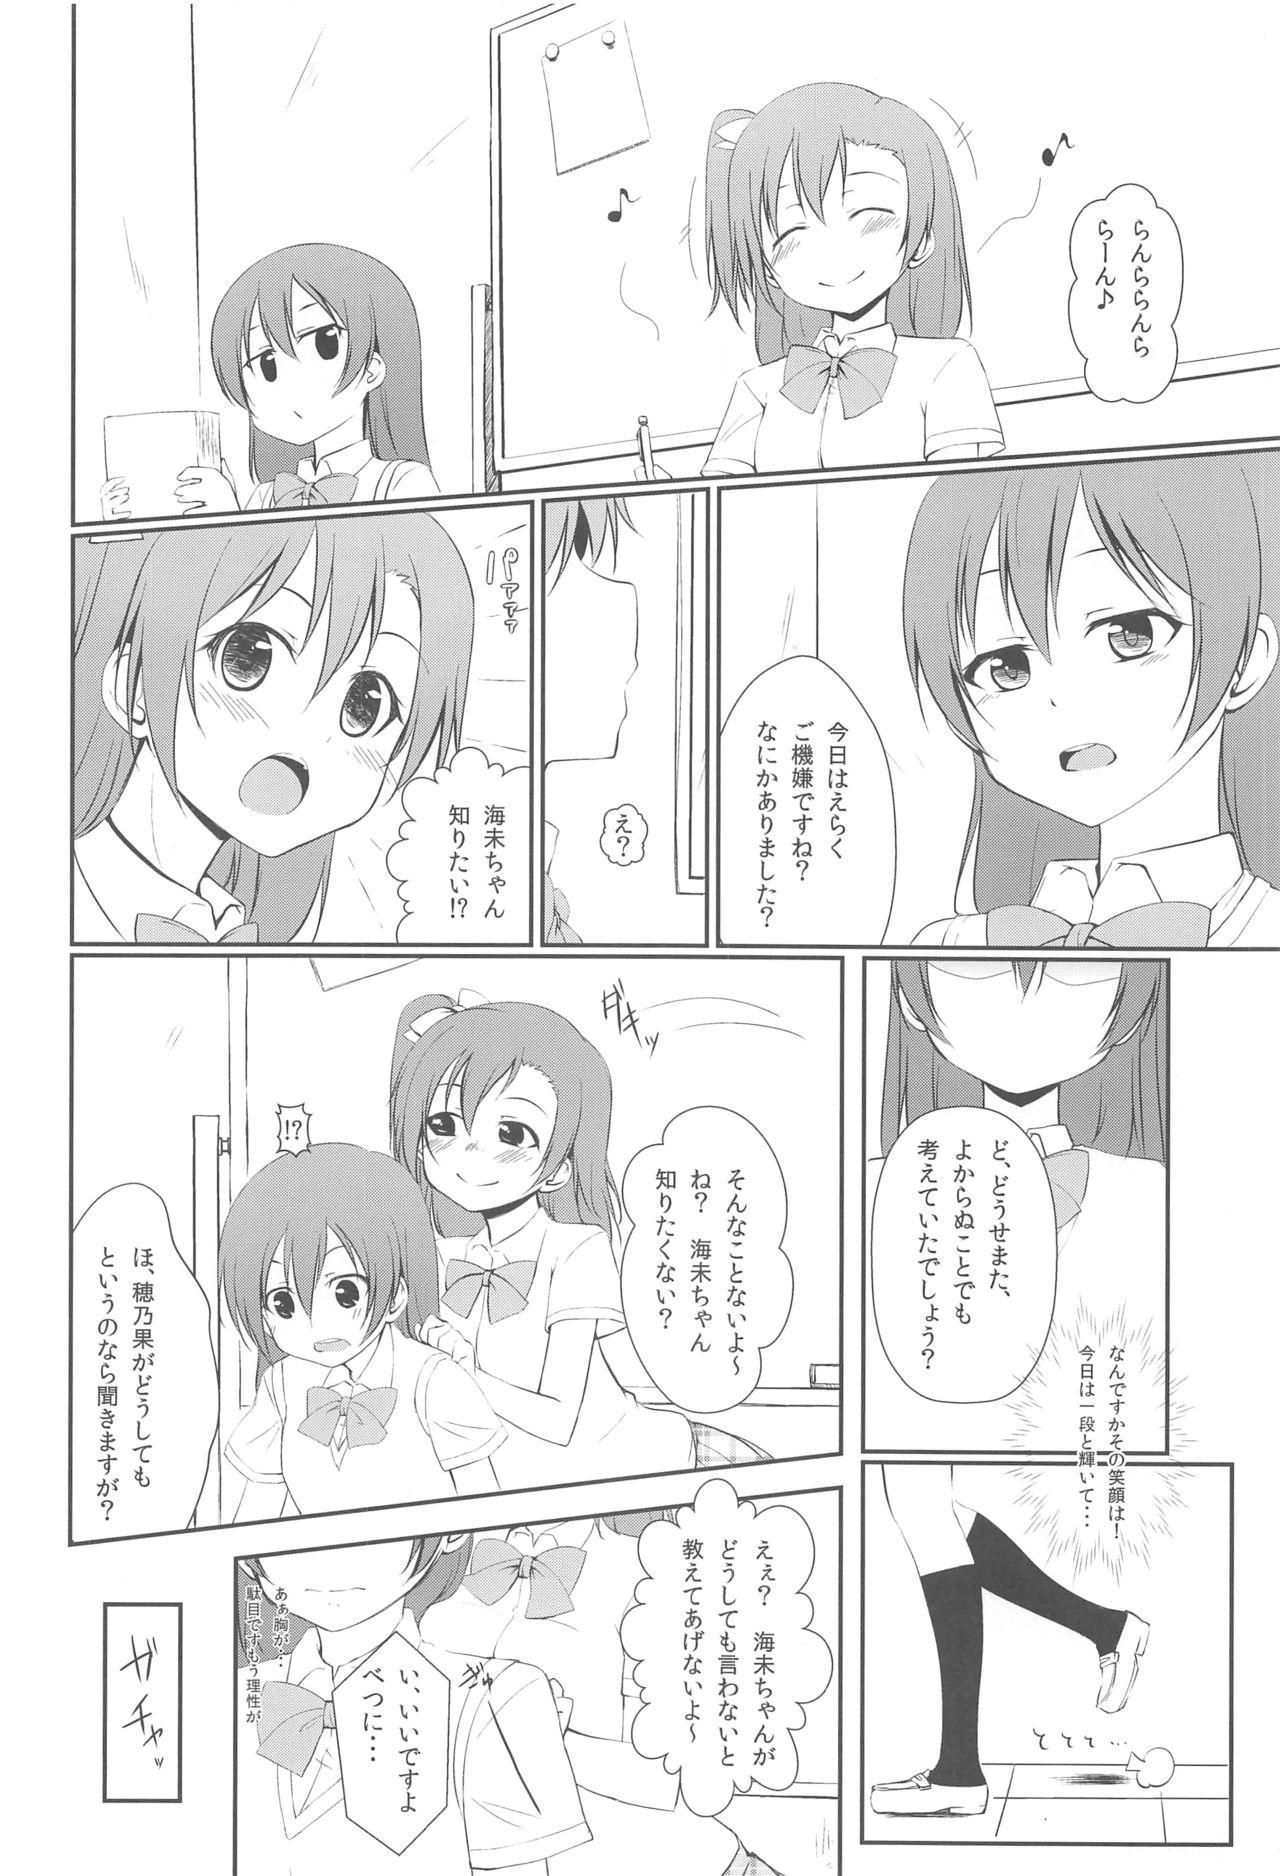 3some UNBALANCED LOVE. - Love live Outdoor - Page 5